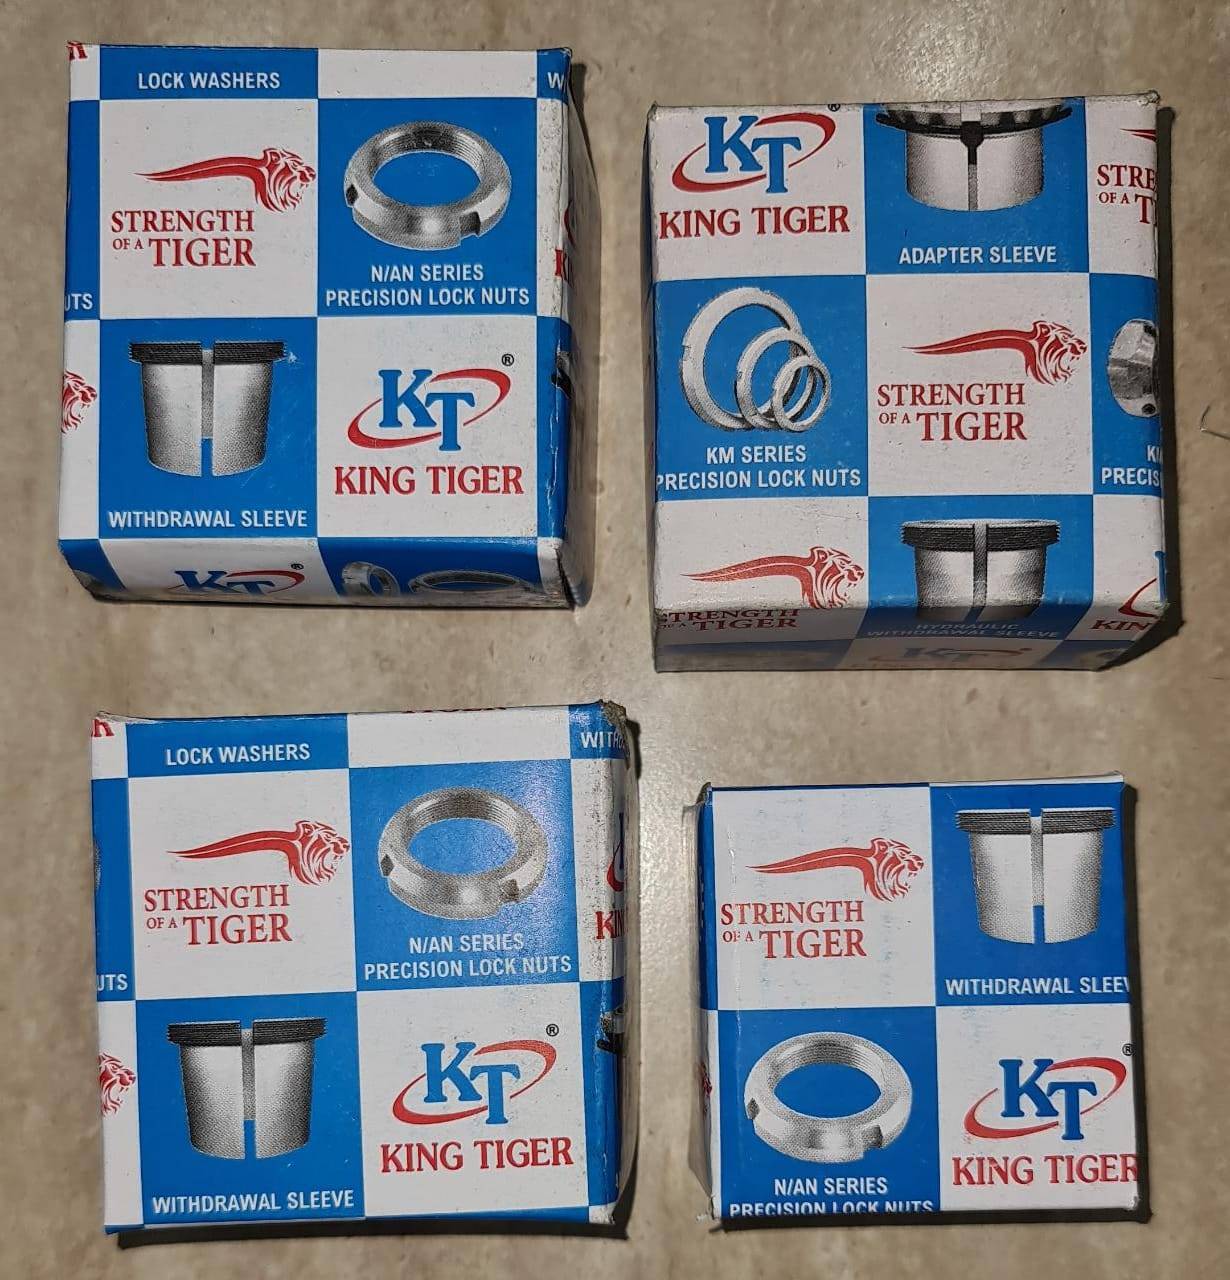 KT King Tiger Products | South India, Middle East, European Countries, USA